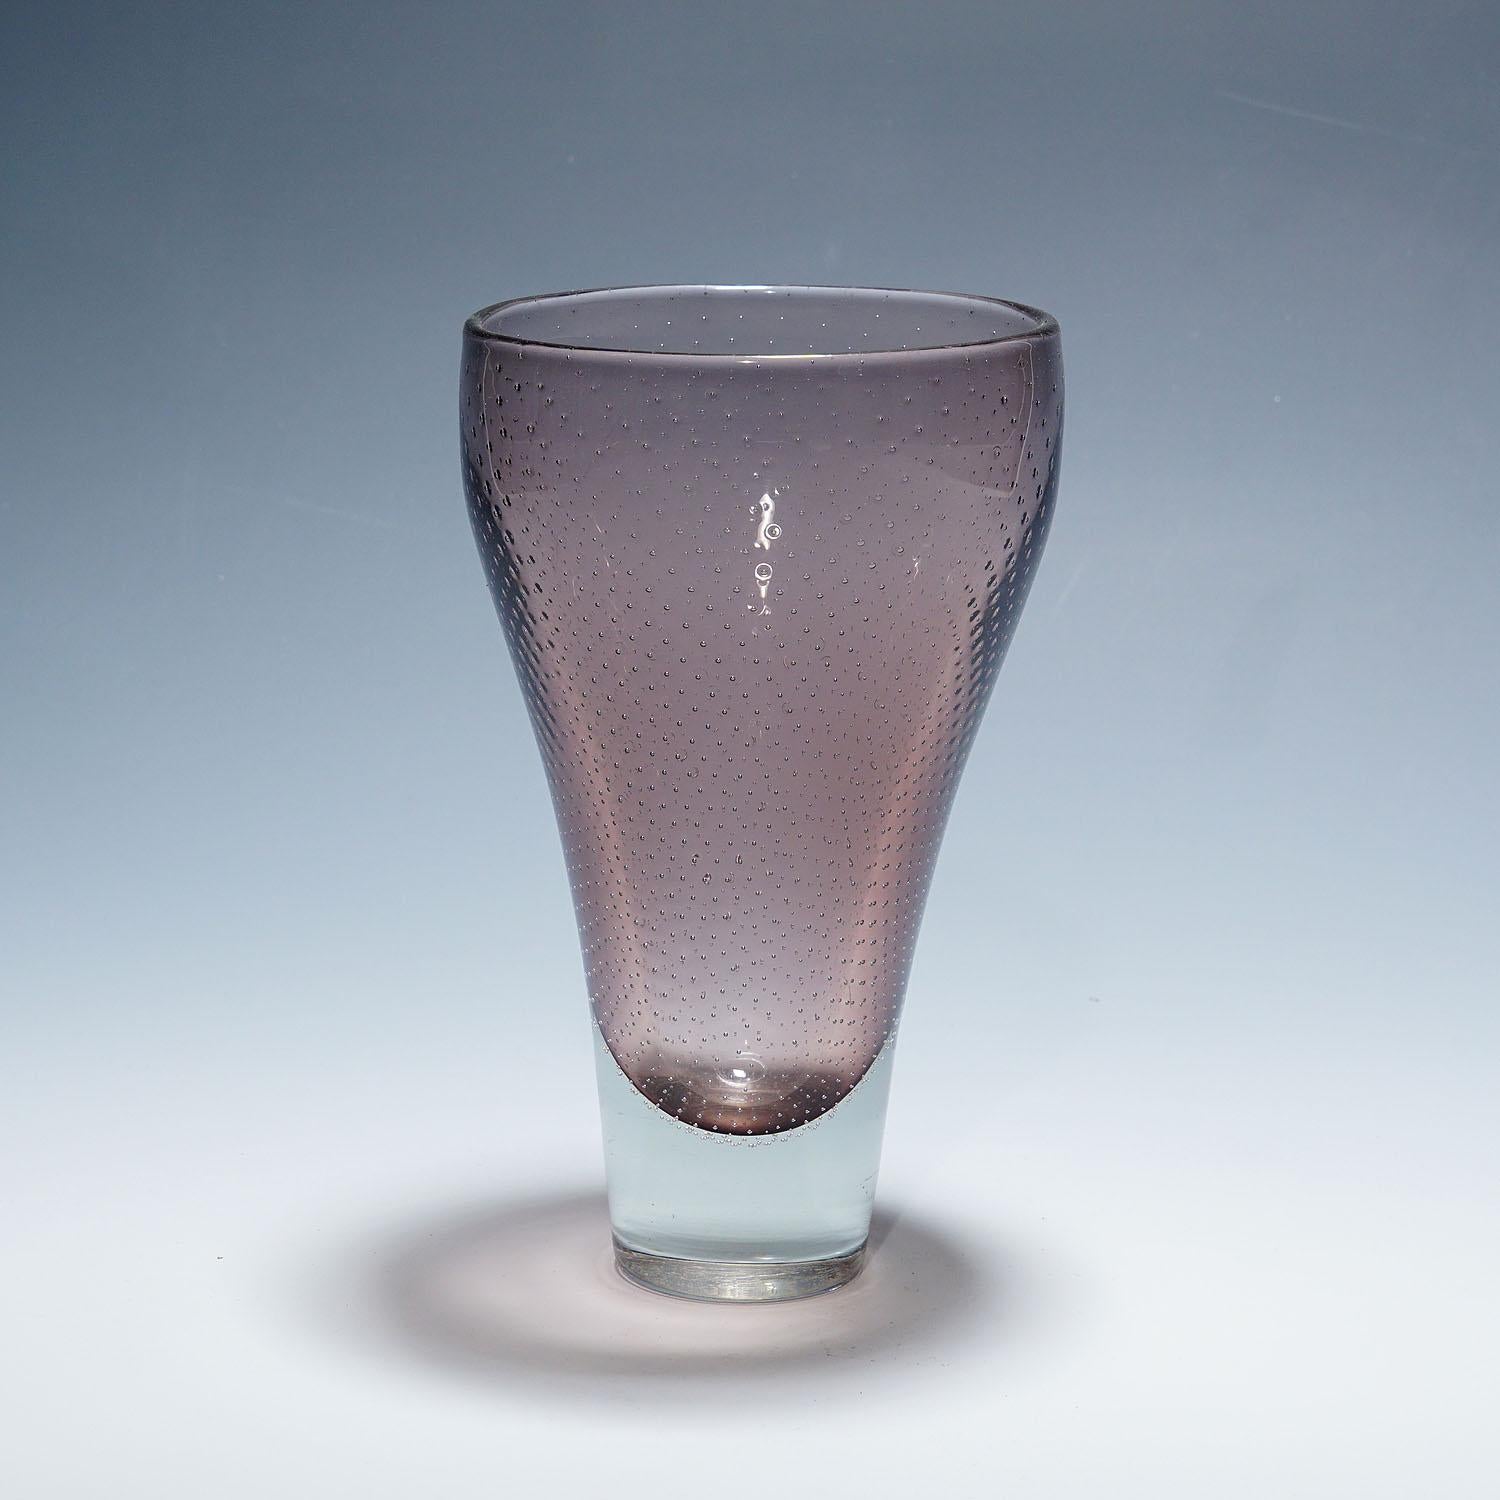 Art Glass Vase by Gunnel Nyman for Nuutajarvi Notsio

A Finnish art glass vase designed by Gunnel Nyman in the late 1940s and manufactured by Nuutajarvi Notsjo in the 1950s. Clear and lilac glass decorated with regular air bubbles. Signed with